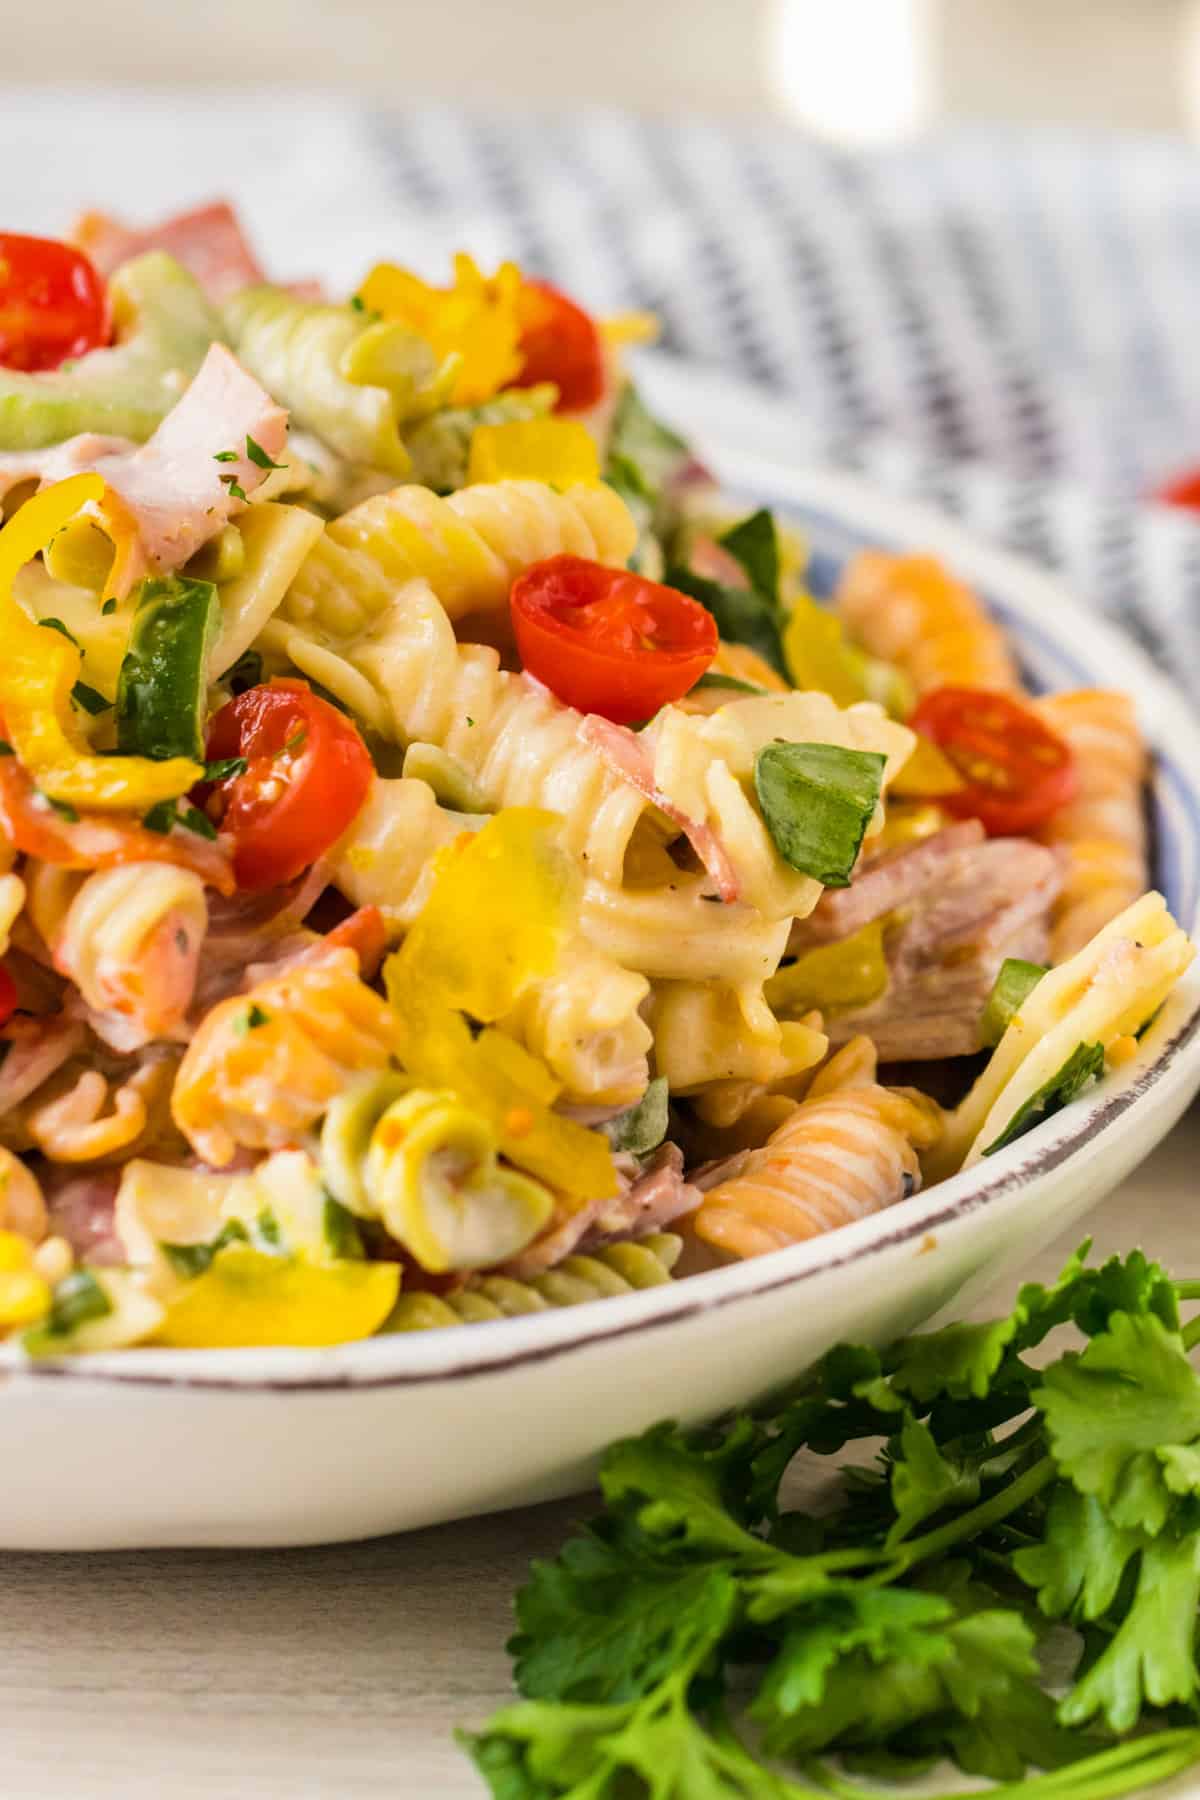 Pasta salad with Italian hoagie ingredients served in a large bowl.